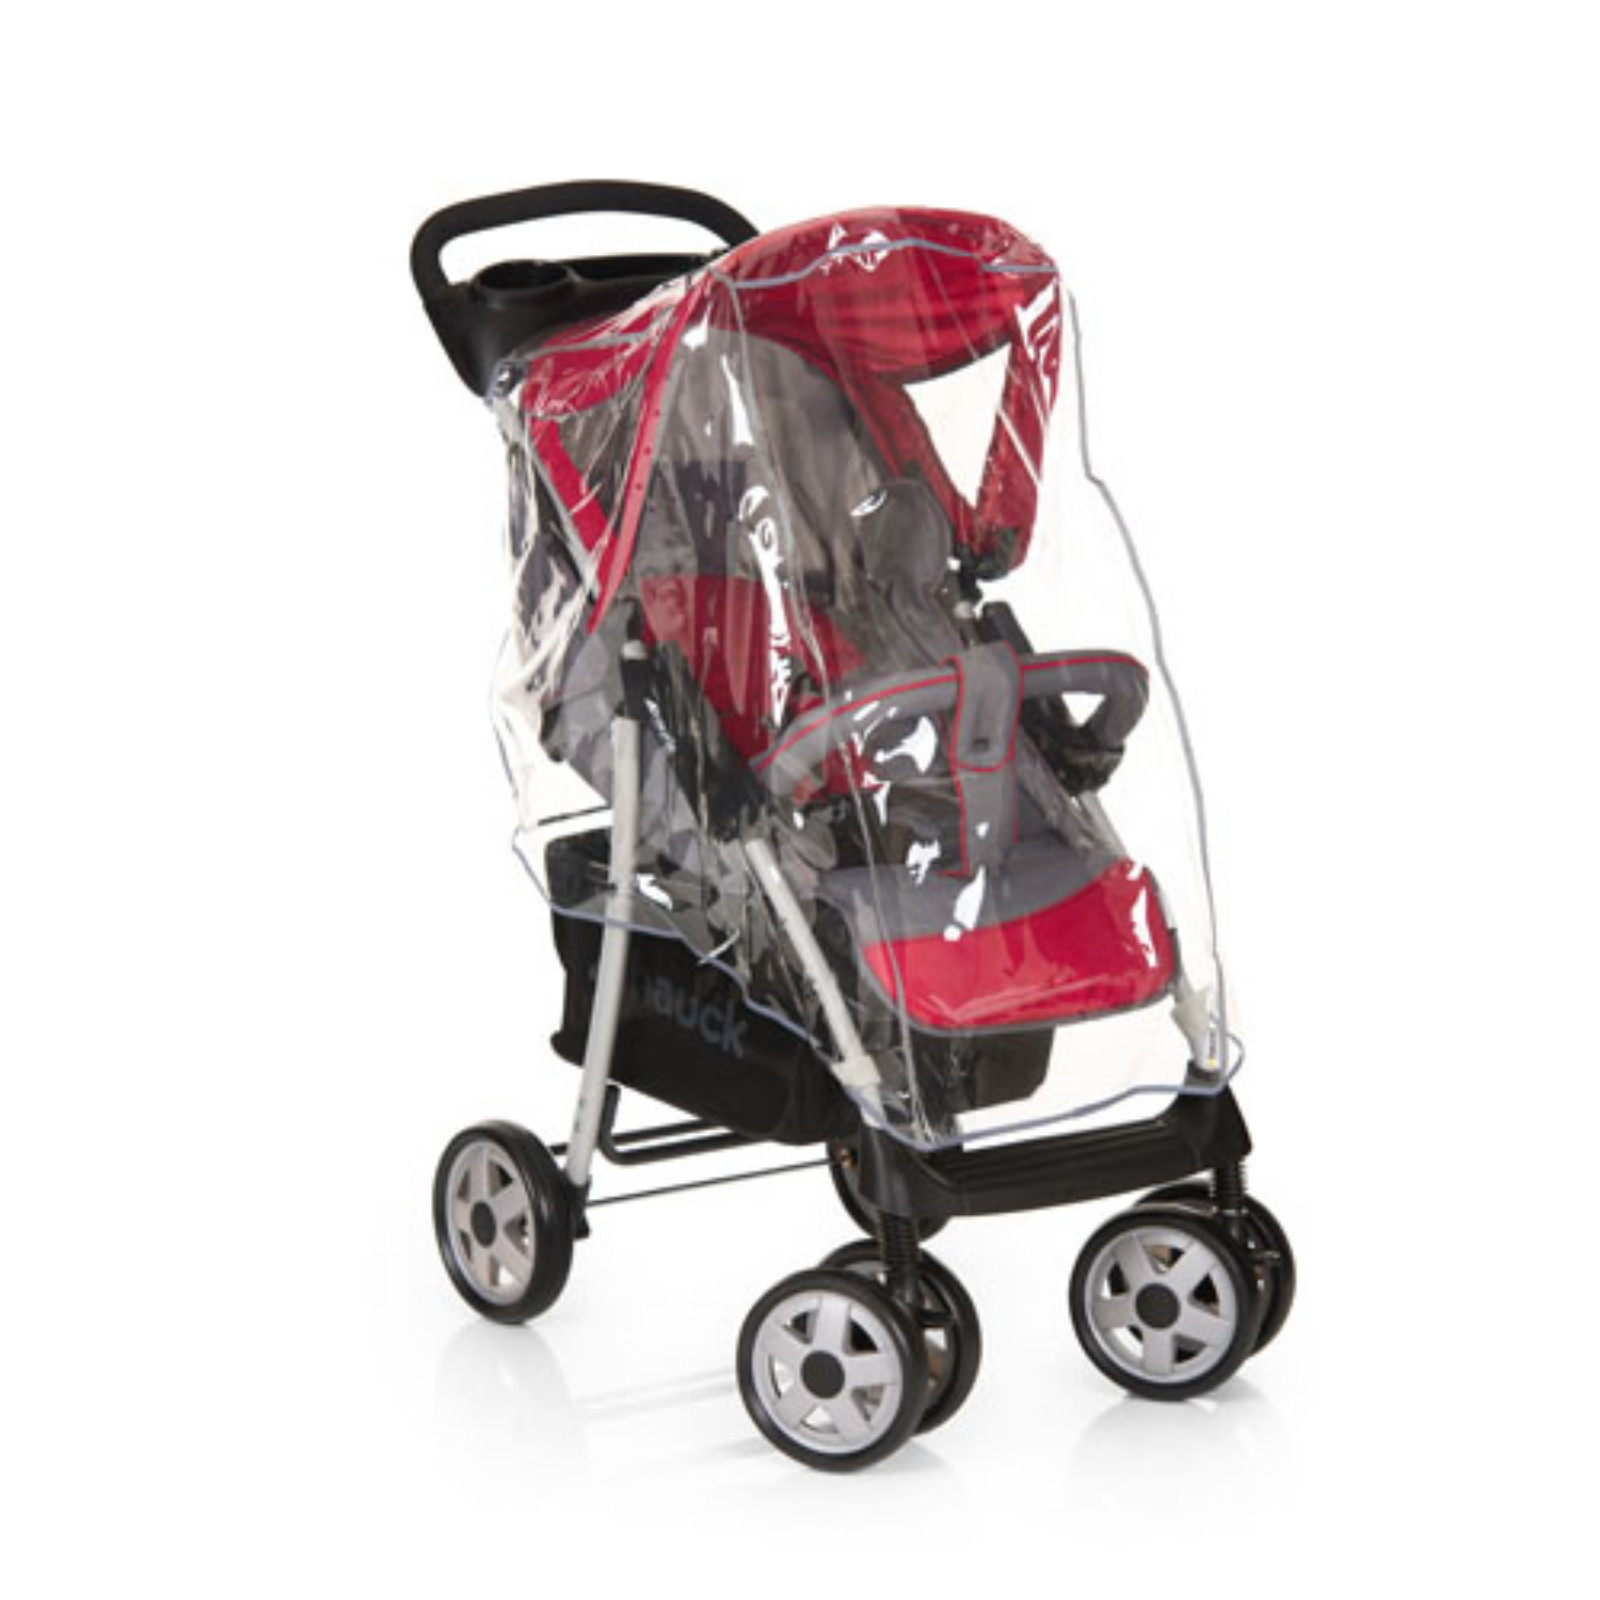 4Baby Stroller Raincover Buy at Online4baby